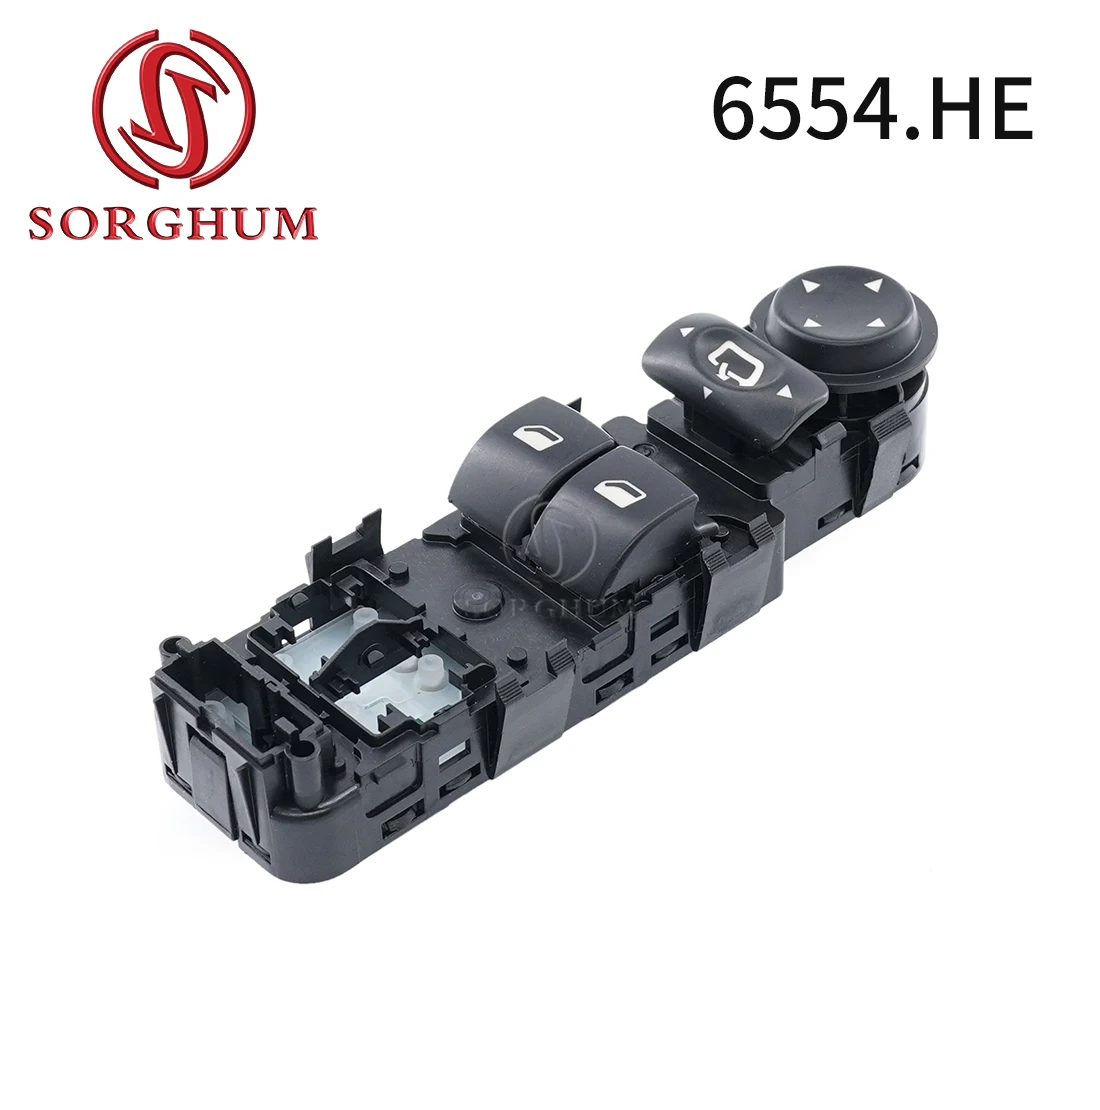 

Sorghum 6554.HE New Regulator Auto Electric Power Window Master Lift Control Switch Button For Peugeot For Citroen C4 2004-2010